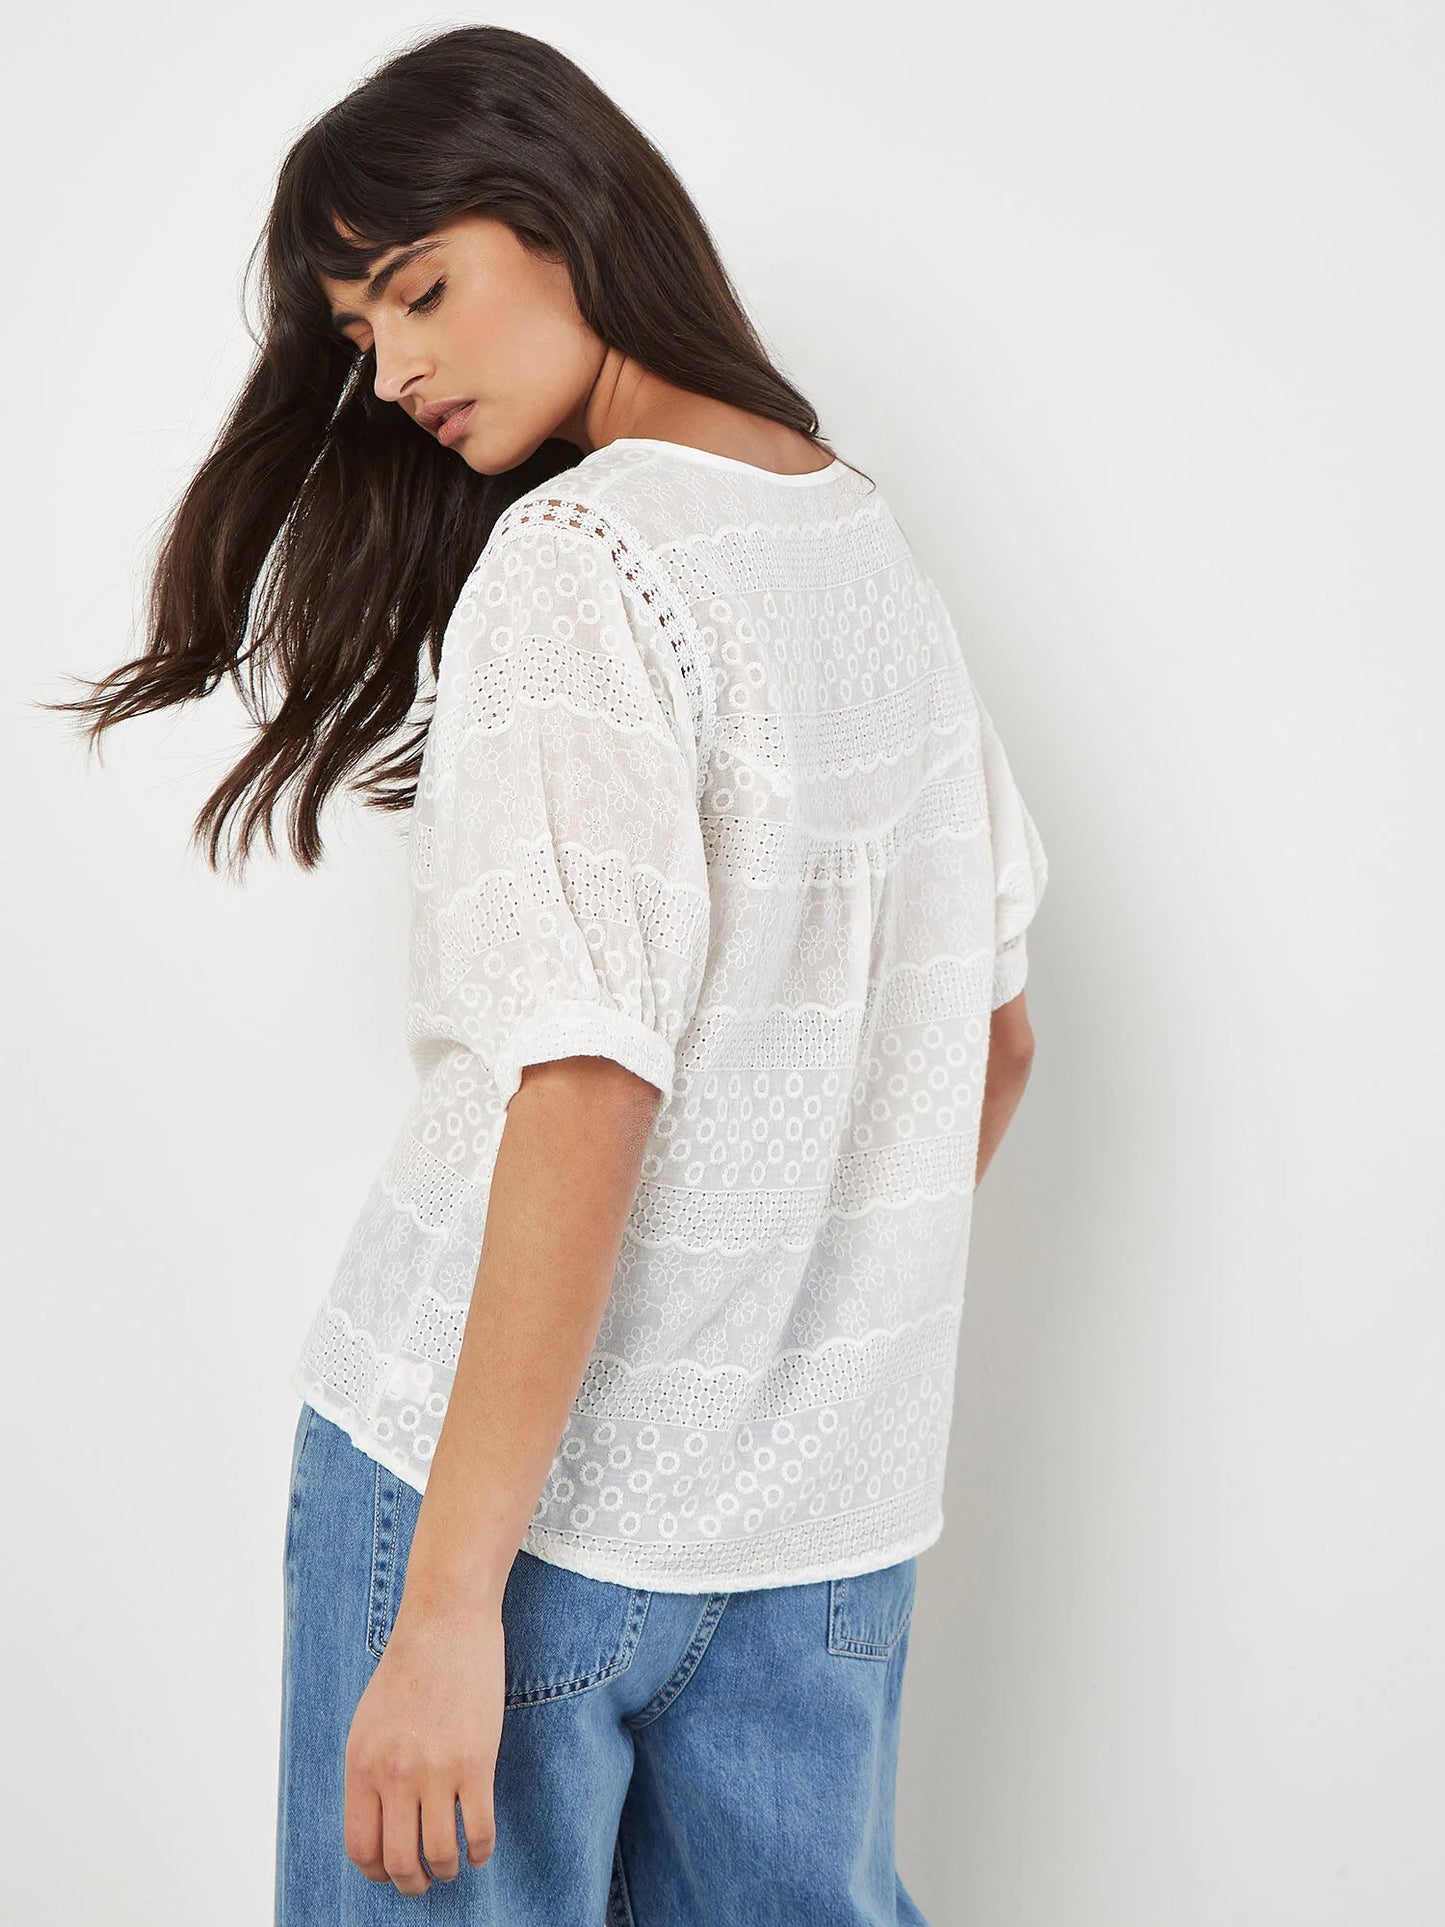 Apricot Floral Broderie Cotton Lace Top White